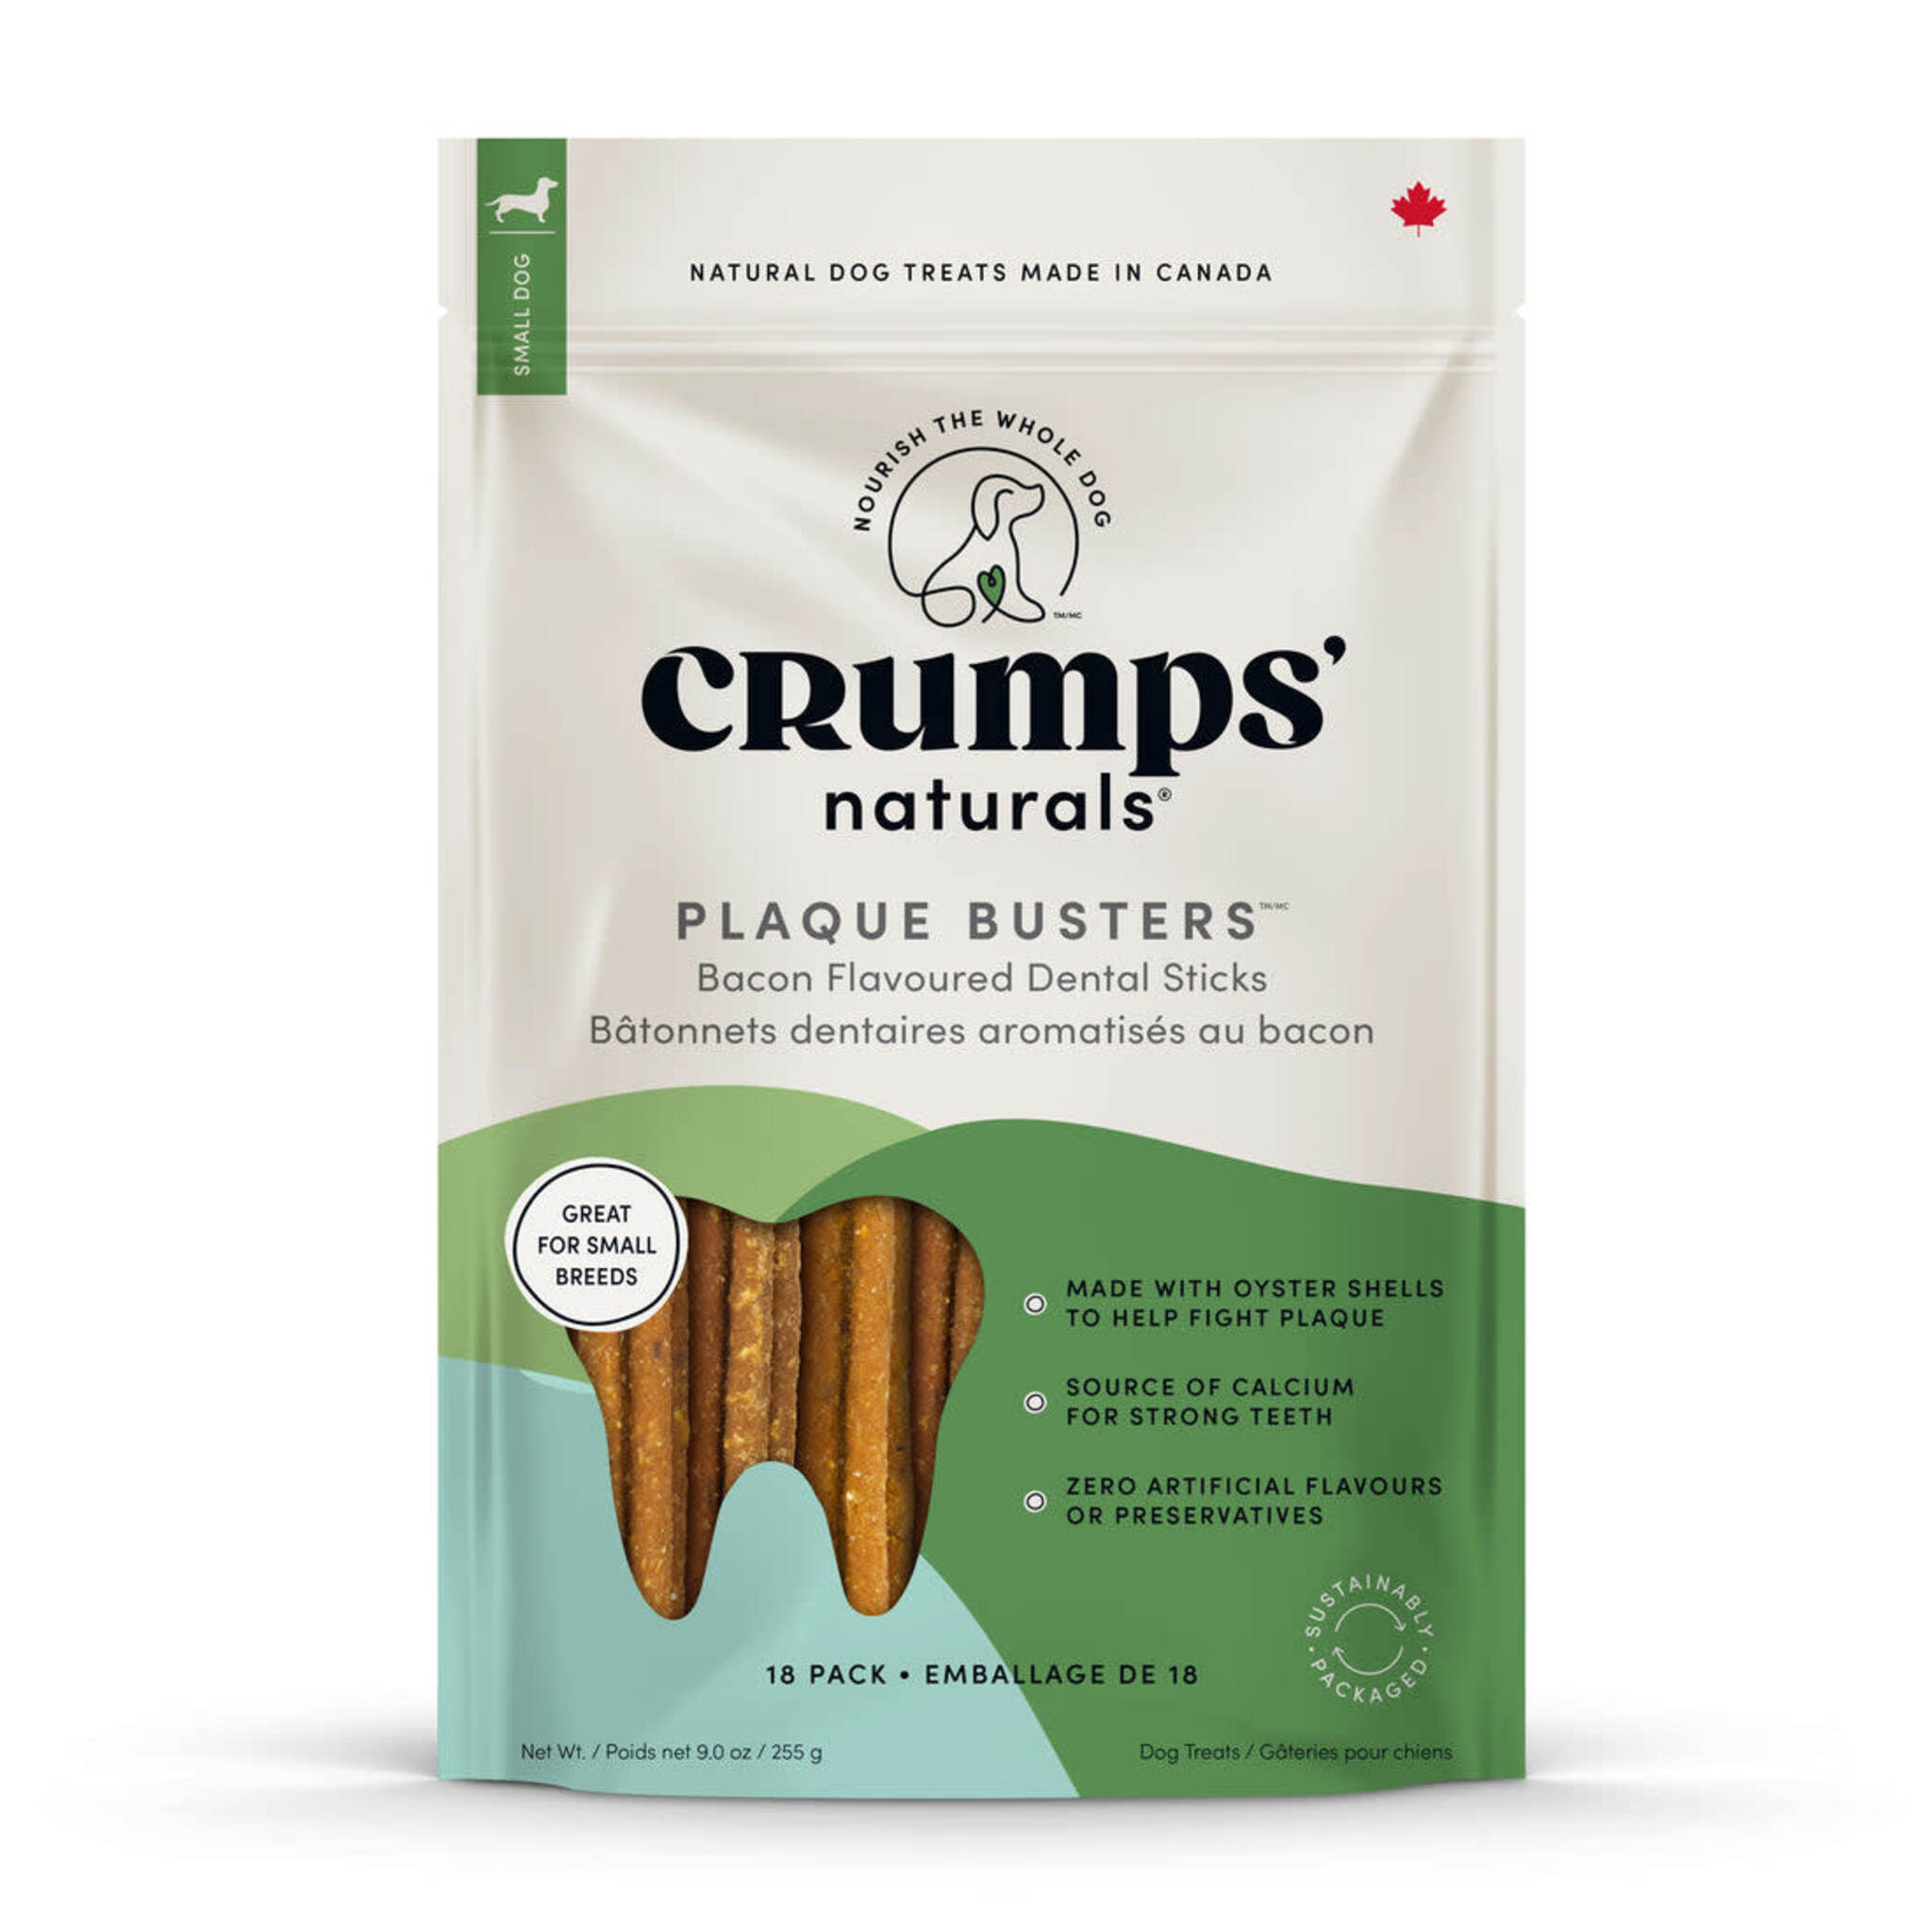 Crumps' Naturals Plaque Buster 7" Bacon 10 pack Dog Treats